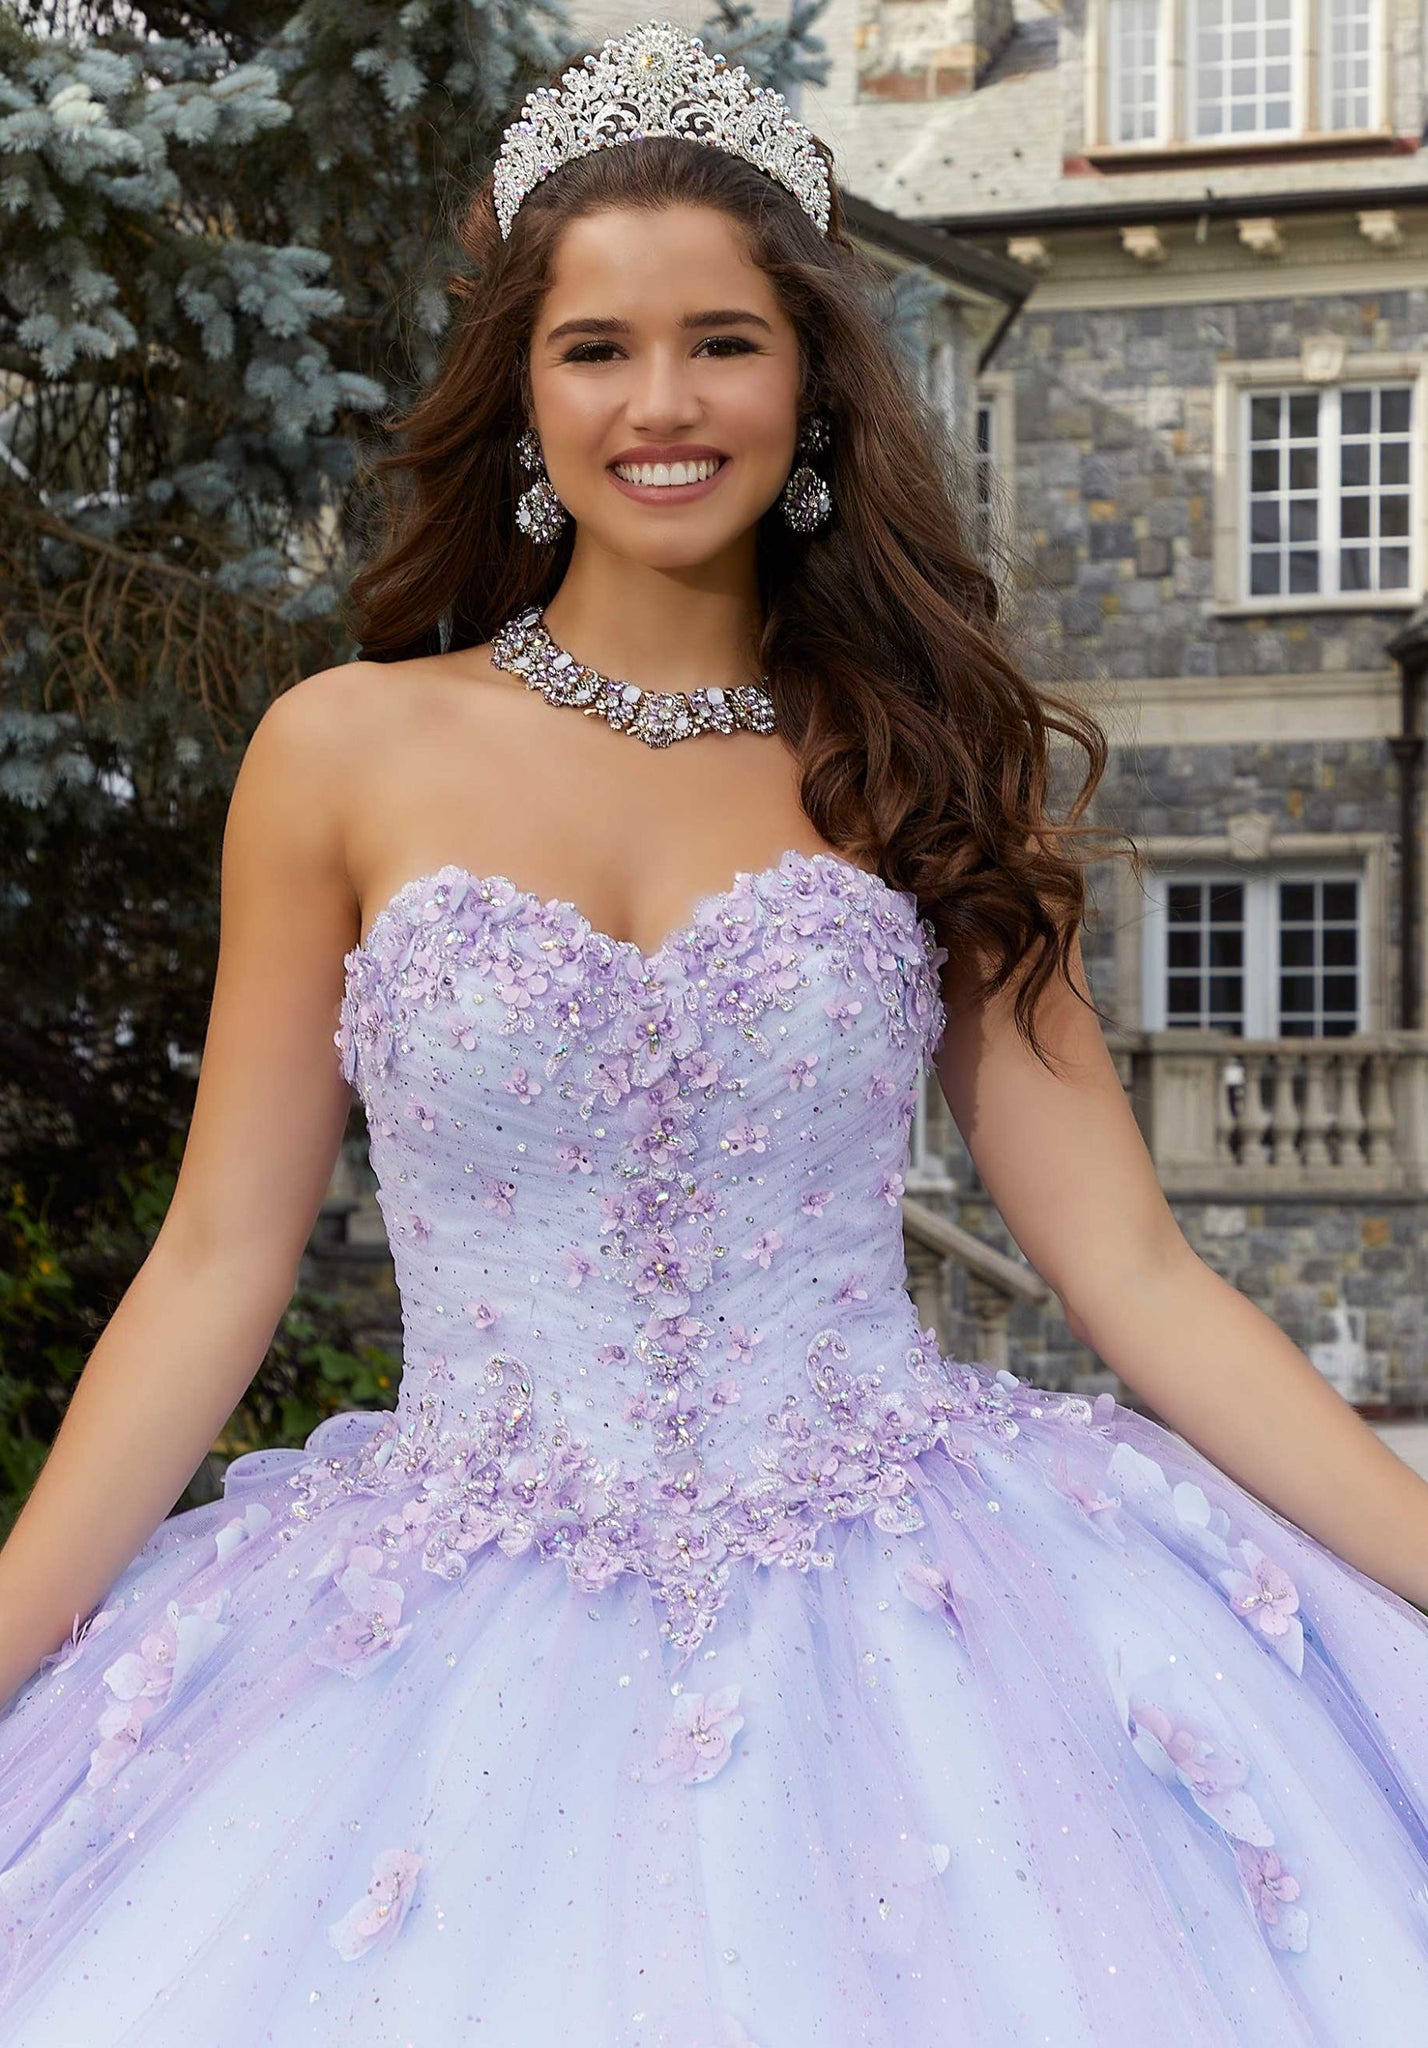 Glitter Tulle Quinceañera Dress with Three-Dimensional Floral Appliqués